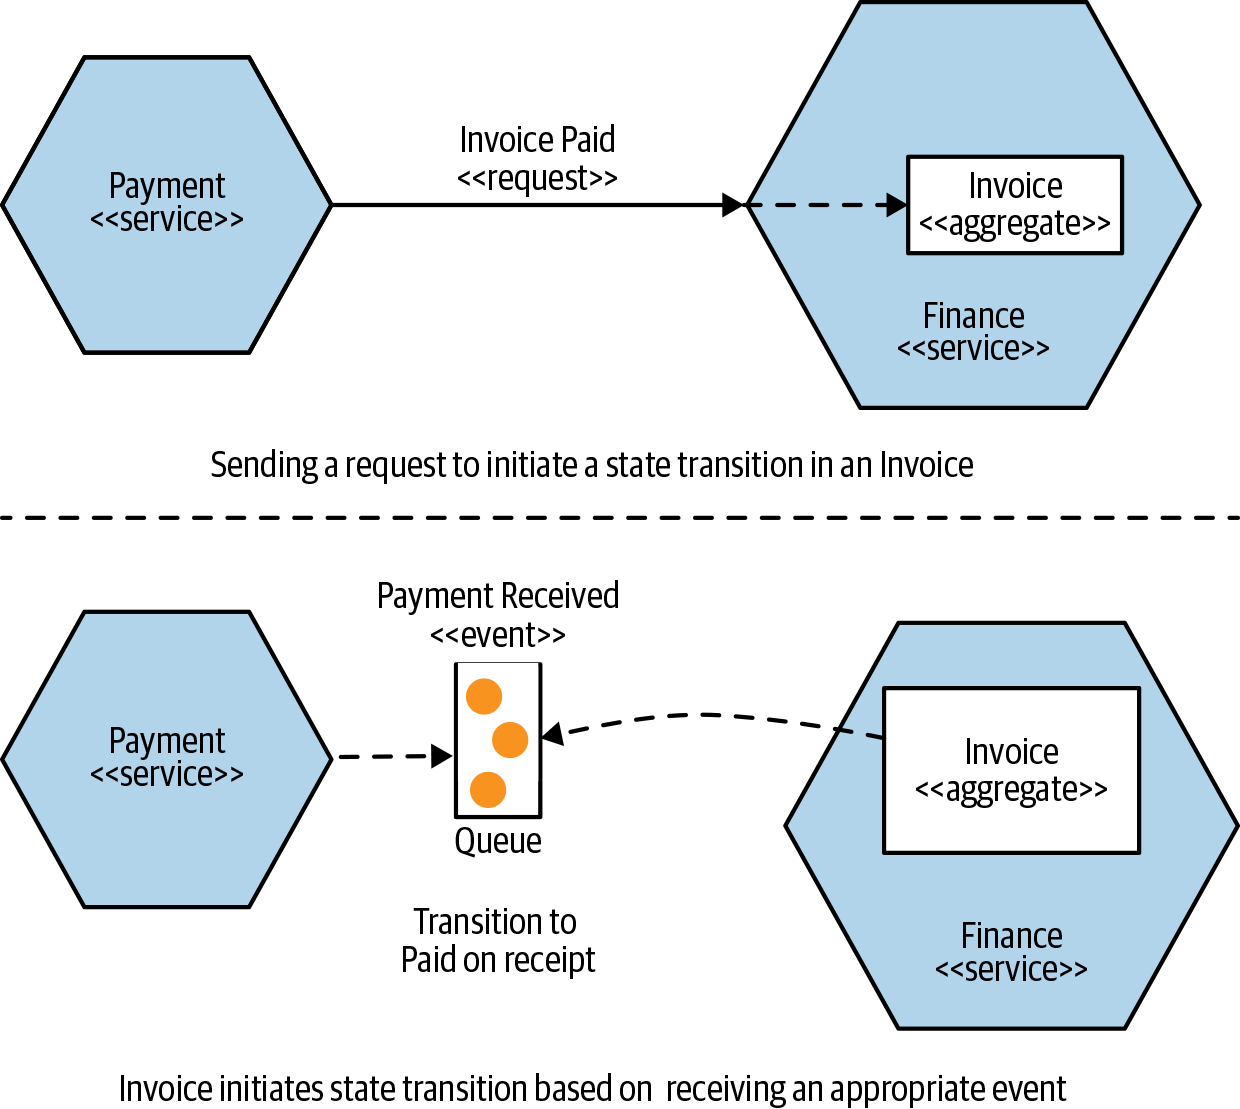 Different ways in which our Payment service may trigger a Paid transition in our Invoice aggregate